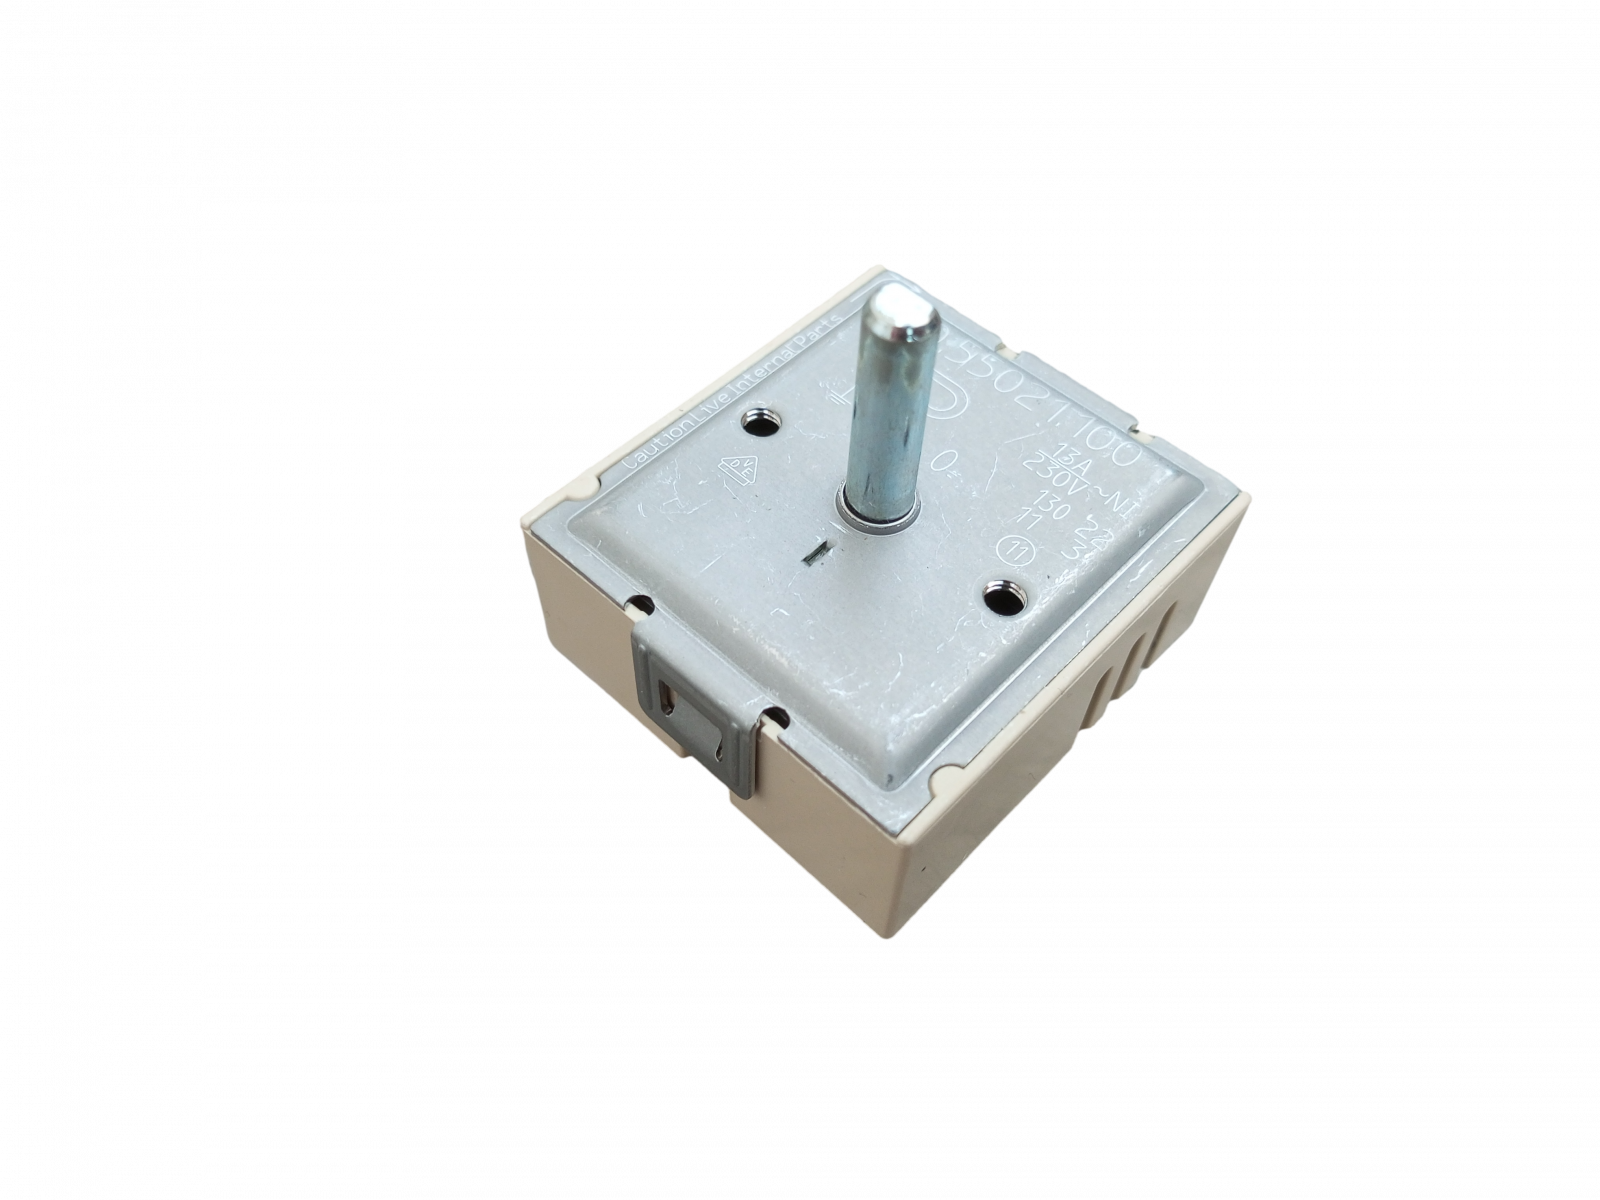 Hot Plate Energy Regulator, Hot Plate Power Switch (for 2 Circuits) for Universal Ceramic Hobs - 50.85021.000 AEG / Electrolux / Zanussi